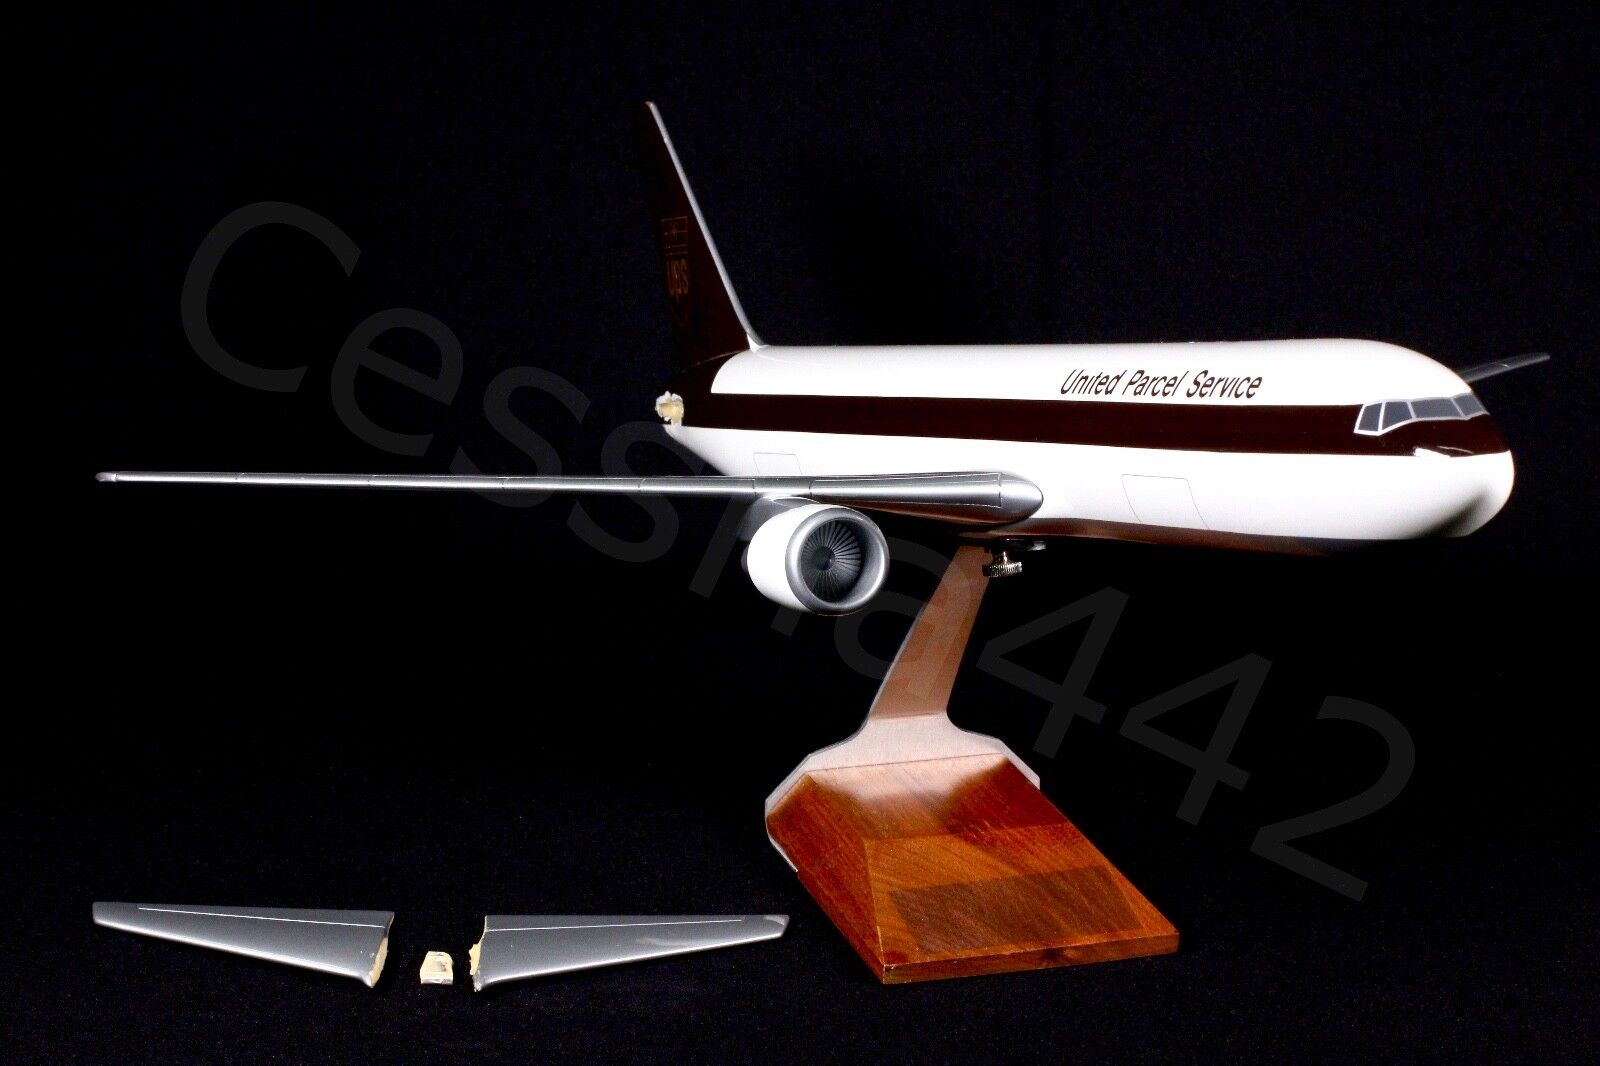 PACMIN Boeing Aviation Cargo UPS 767-300 Airline Aircraft Model 1:100 Rare As Is